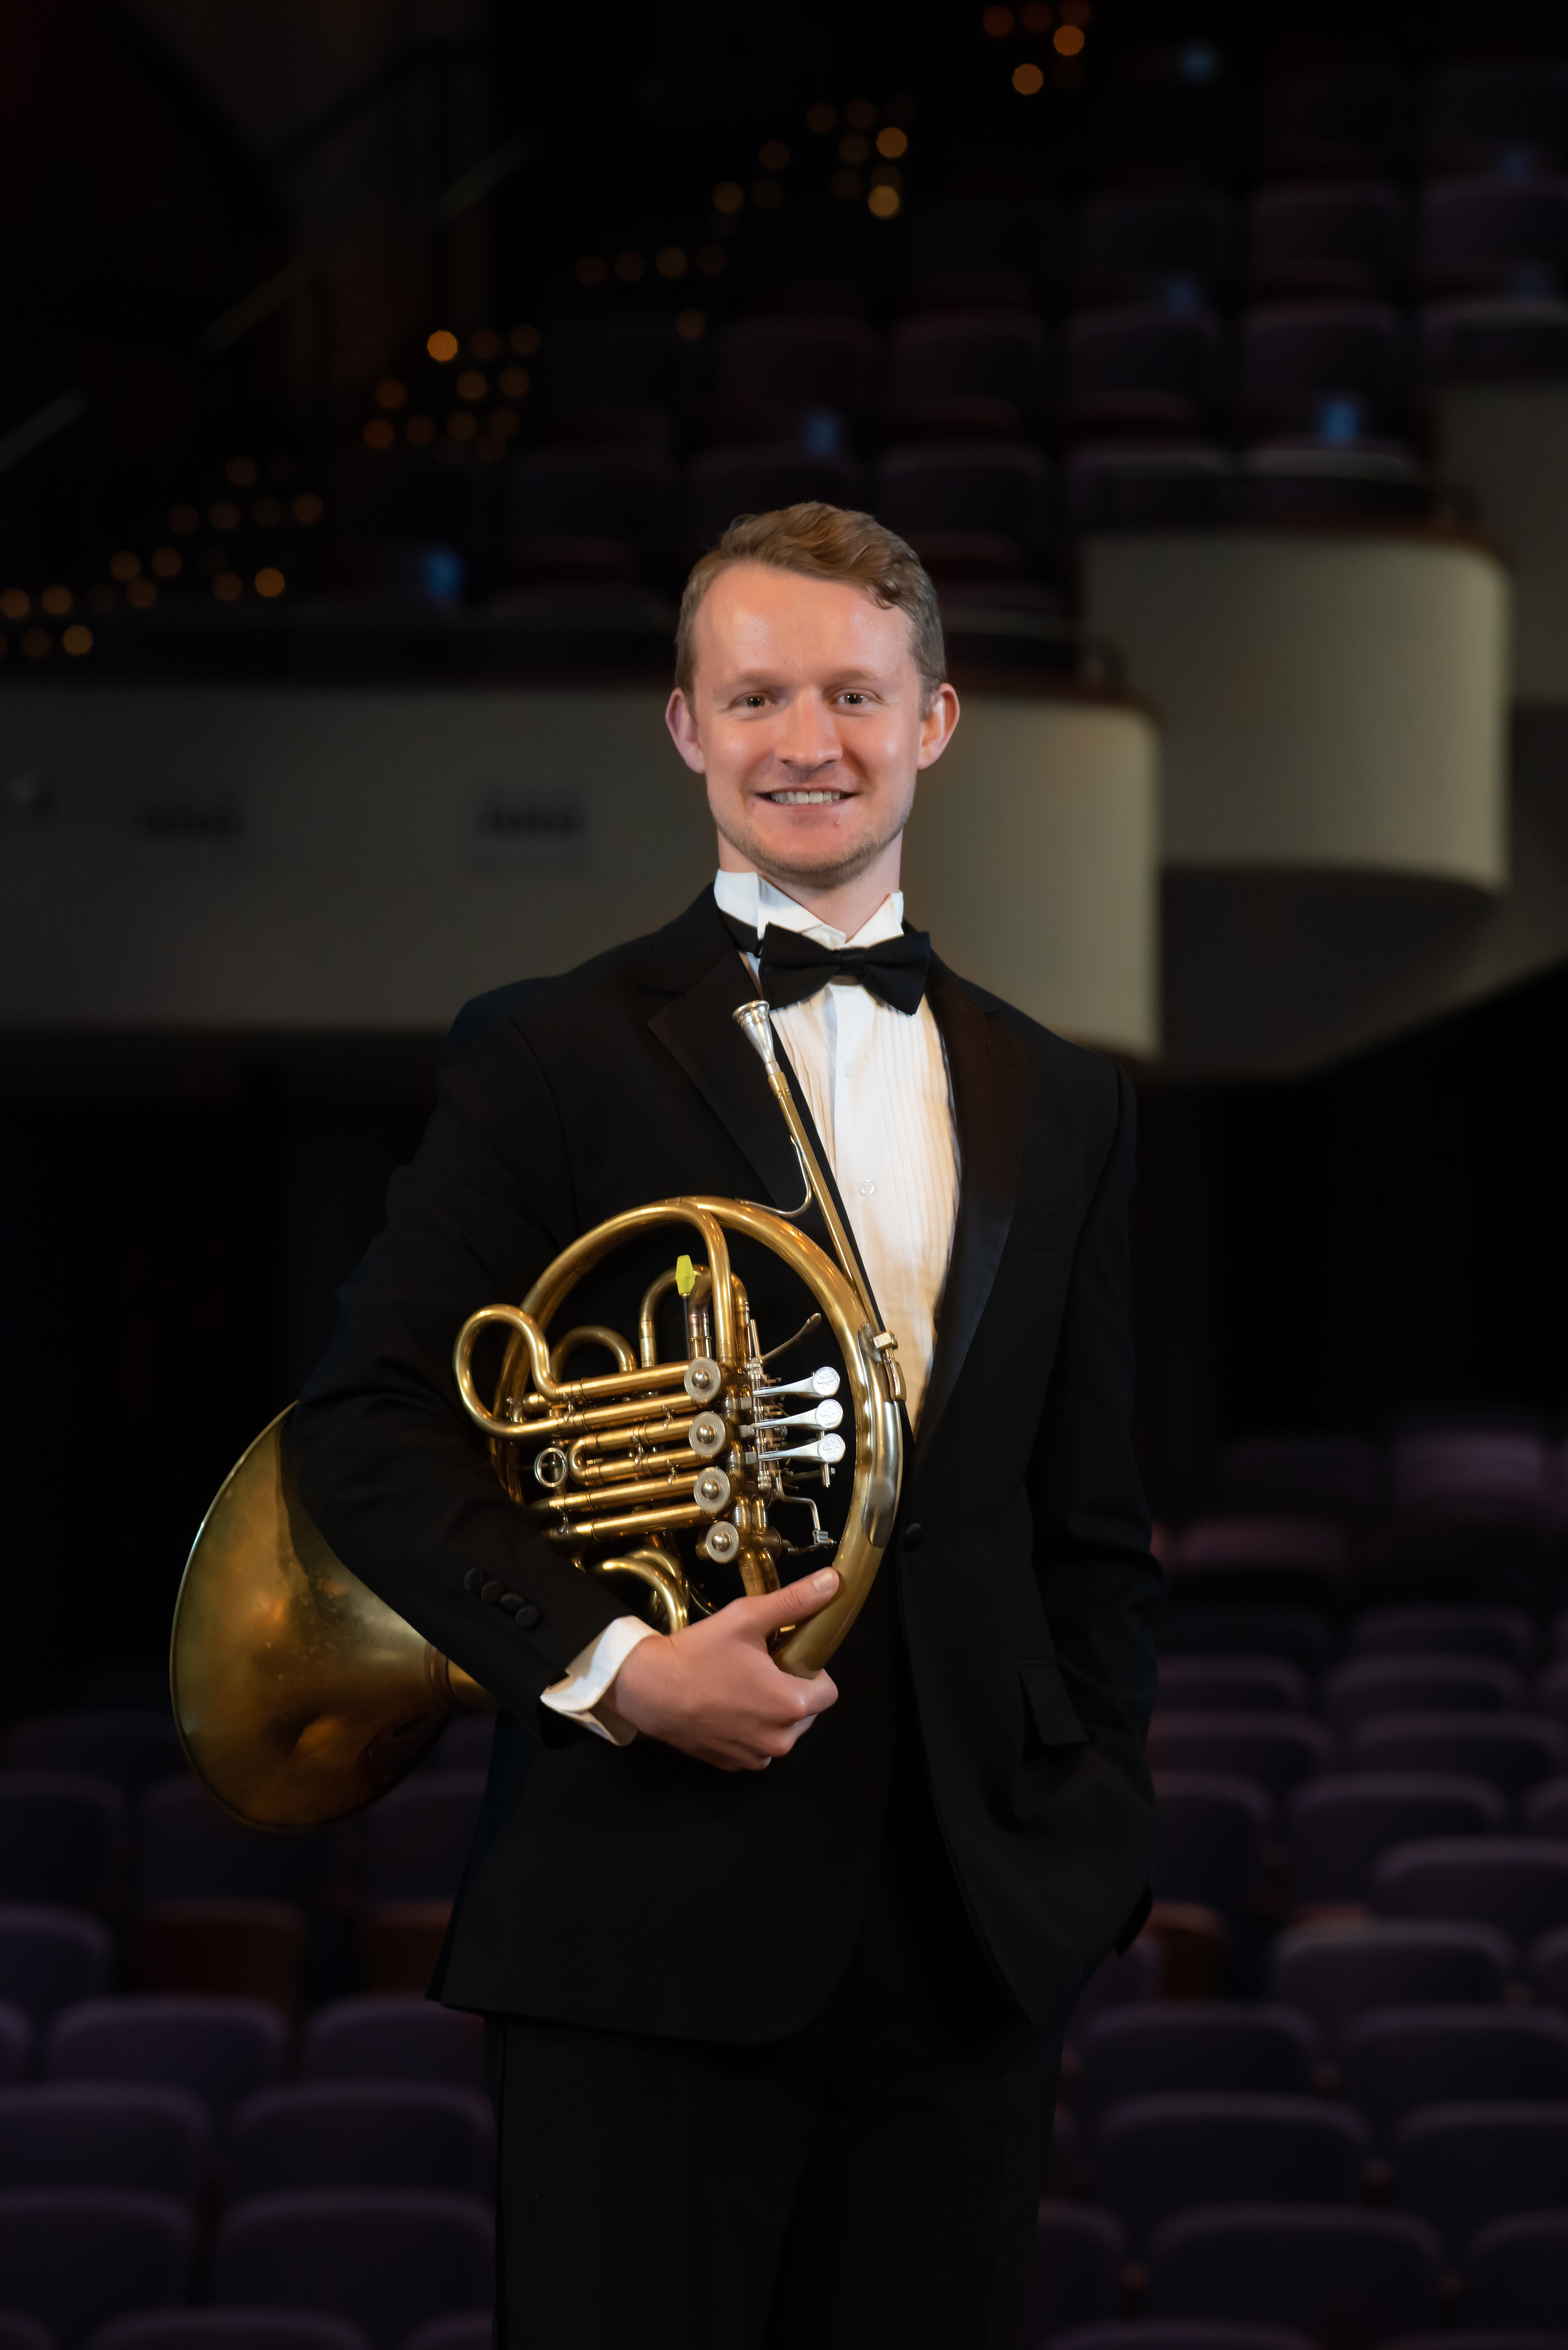 This is a picture of Daniel Kitchens, the guest artist and clinician for the 2023 Brassapalooza.